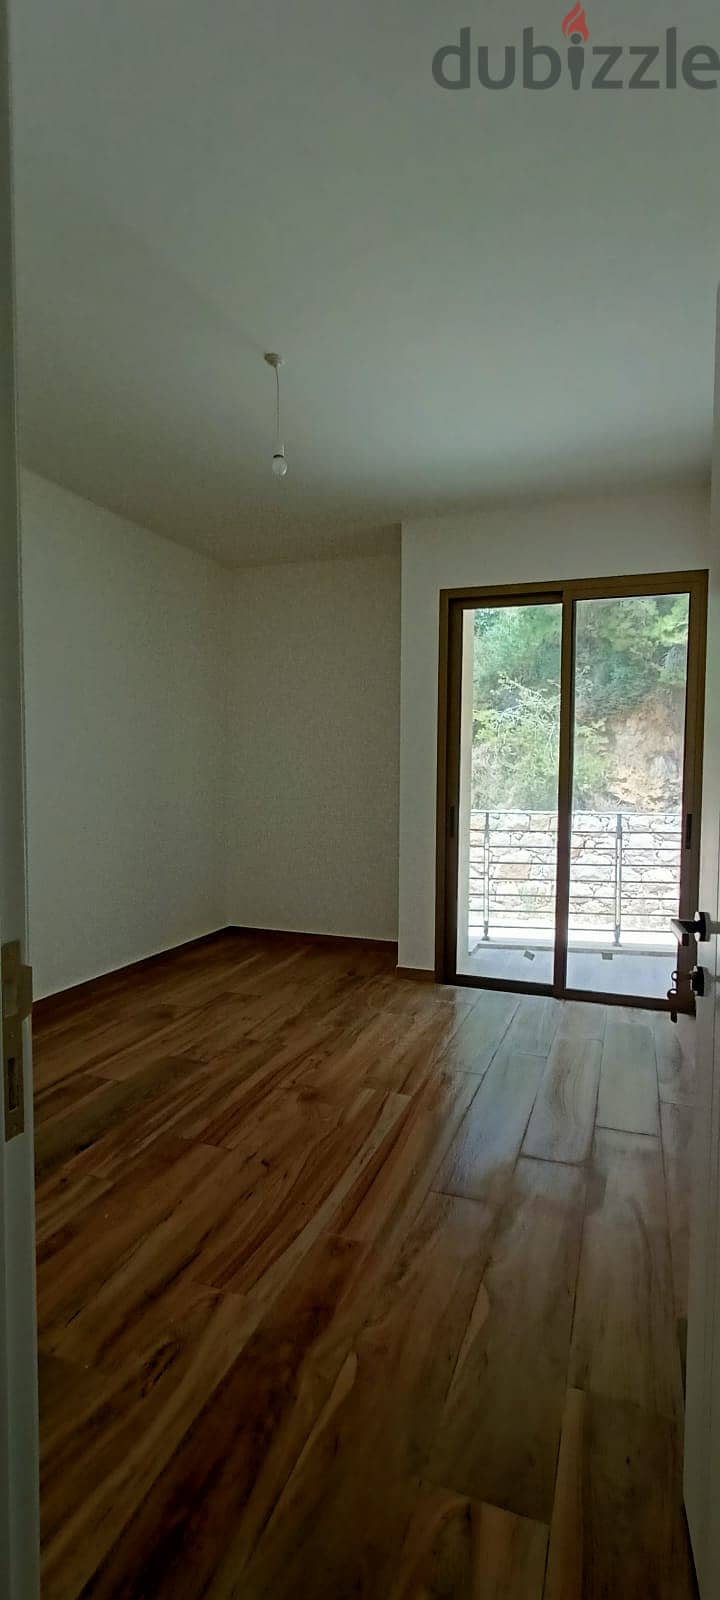 AIN SAADE PRIME (180Sq) WITH VIEW , (ASR-101) 2